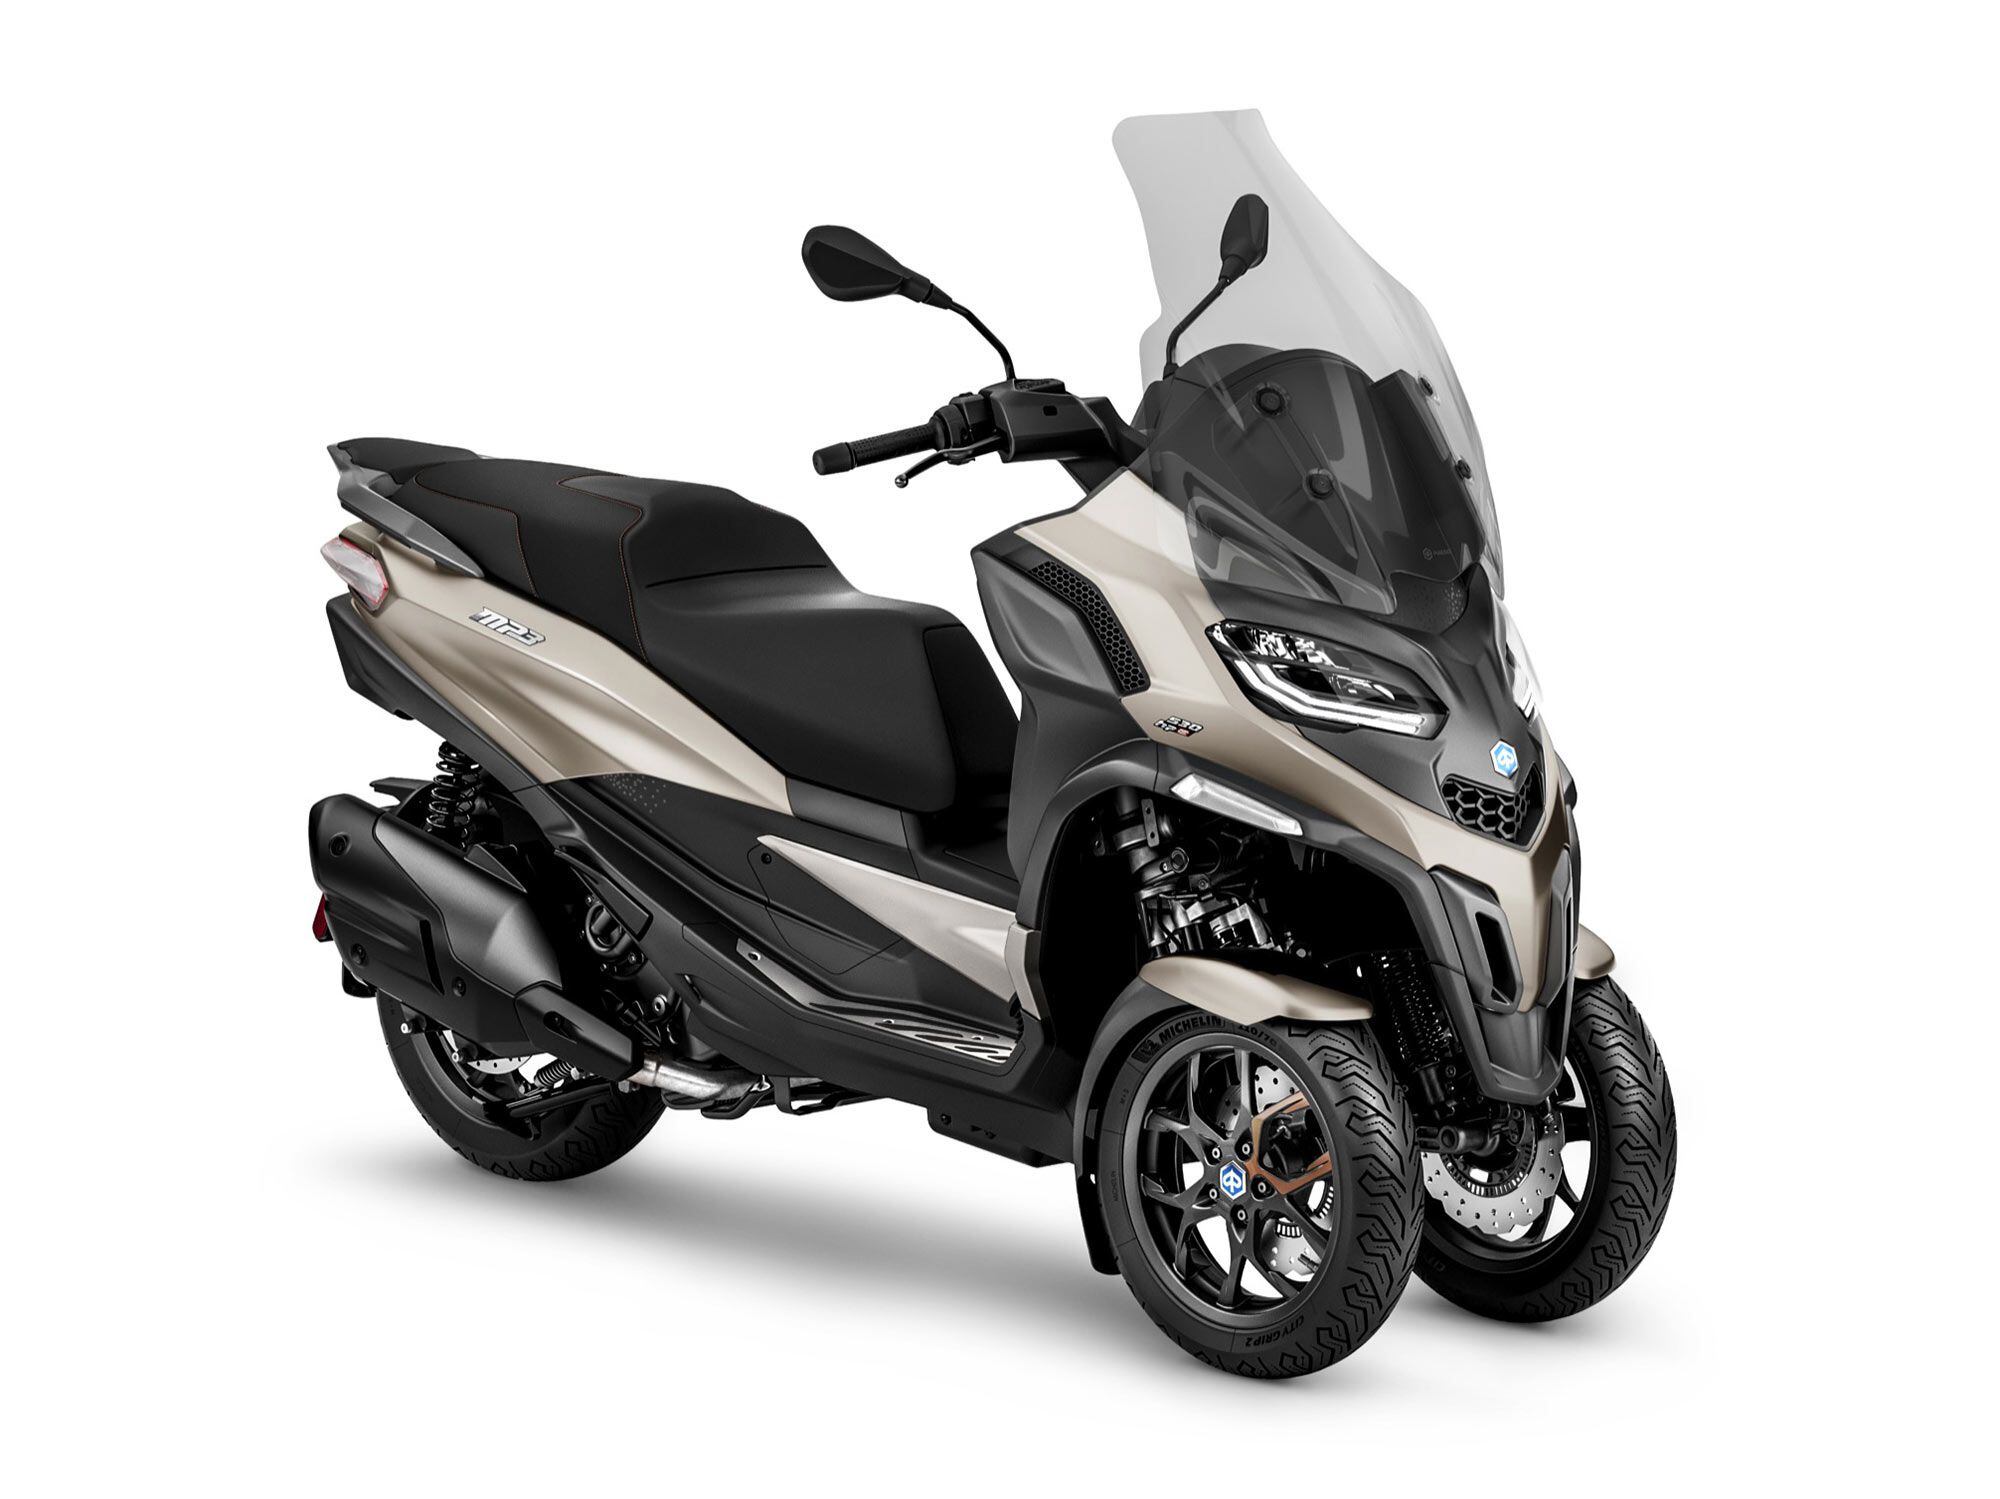 The all-new Piaggio MP3 530 hpe Exclusive comes with advanced rider aids such as blind spot and lane change detection.